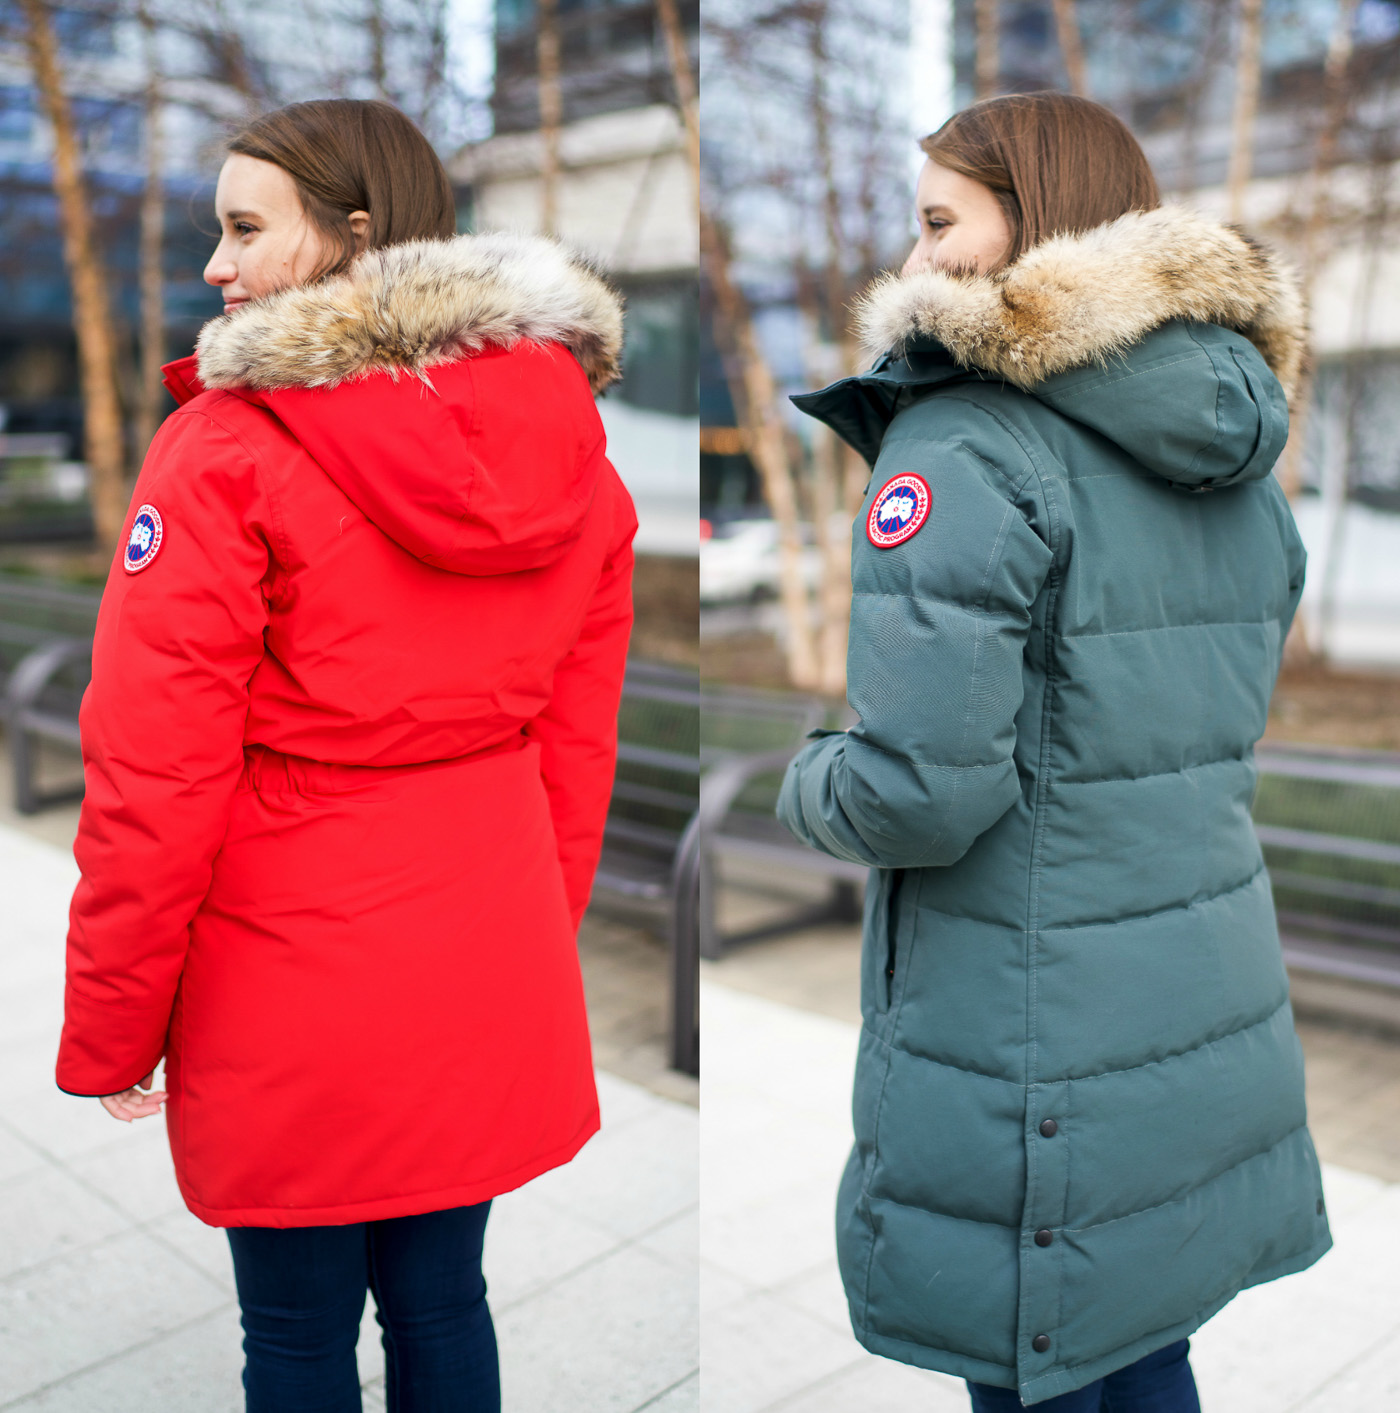 Canada Goose Review: Trillium vs Shelburne | Connecticut Fashion and Lifestyle Blog Covering the Bases